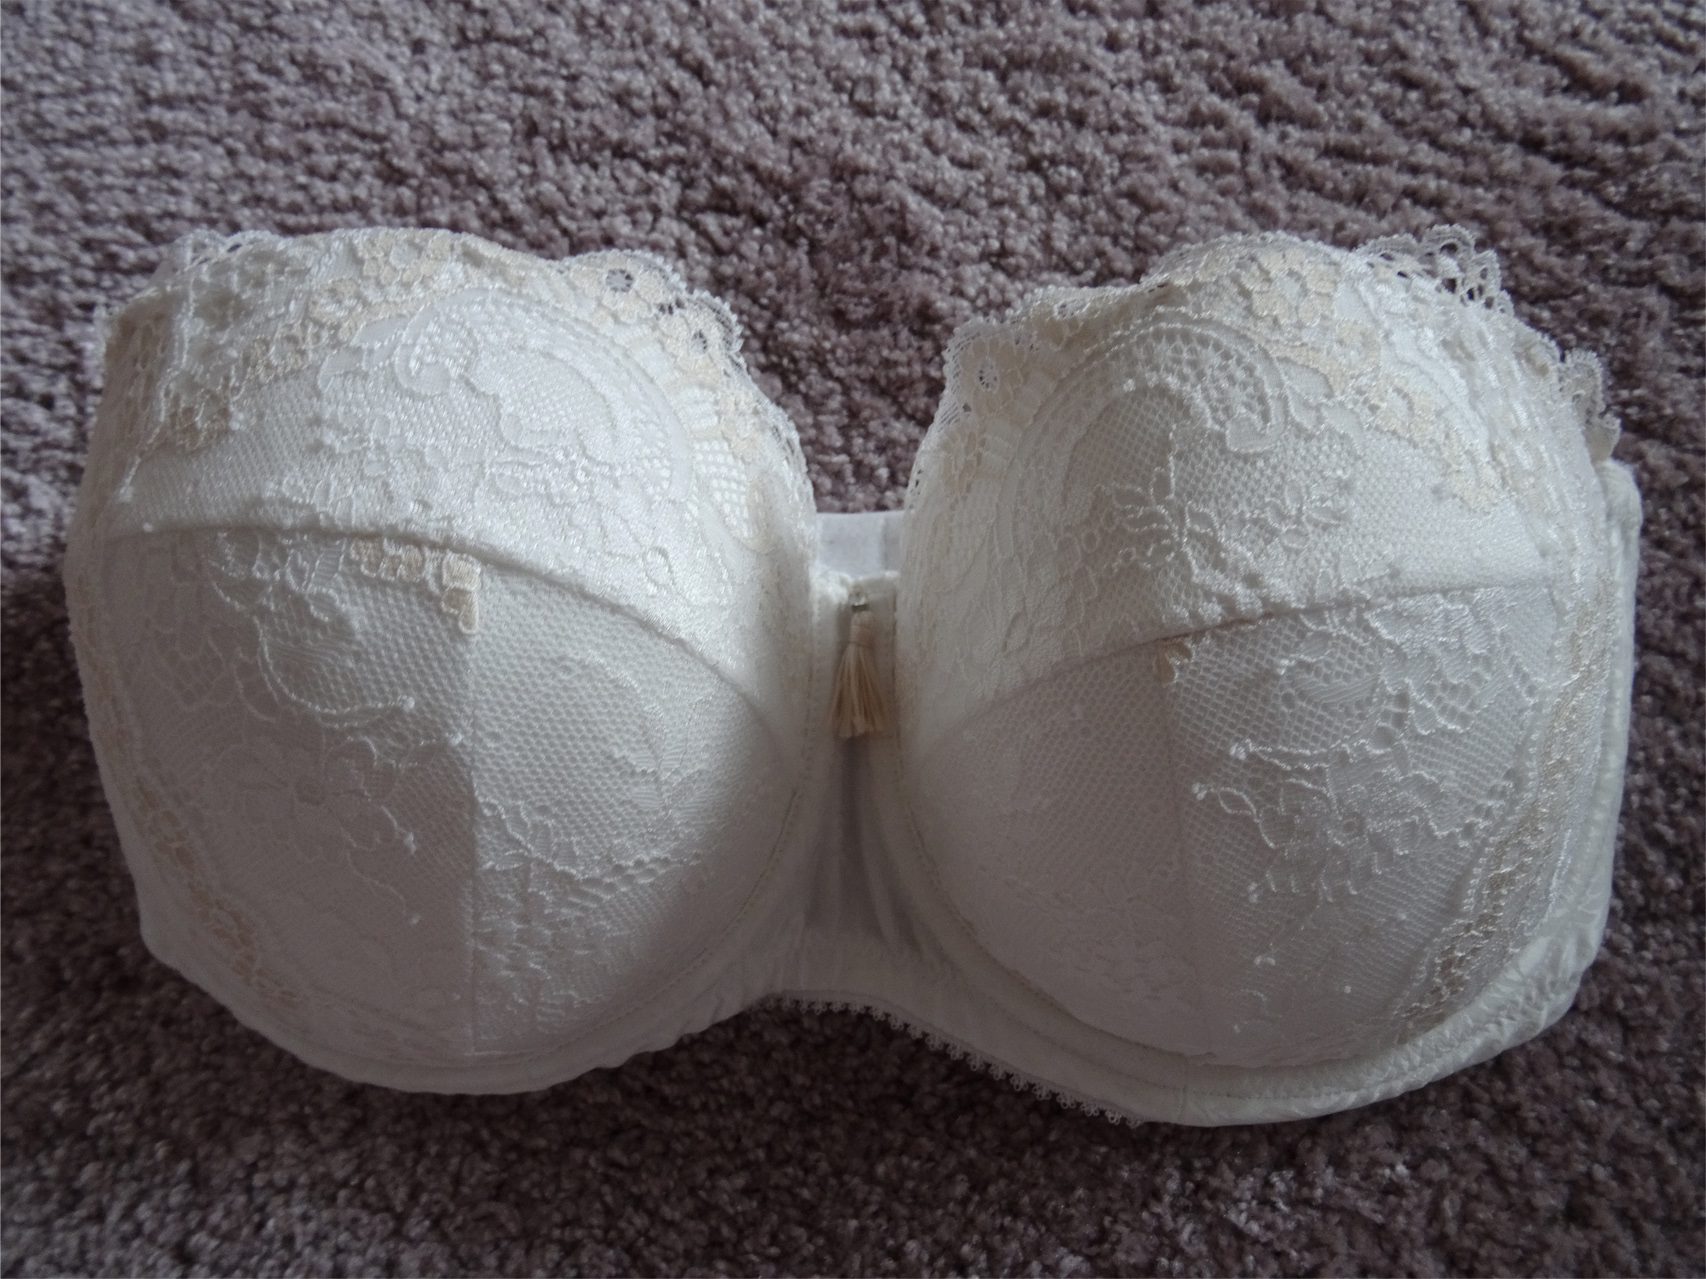 Charnos Superfit Lace Strapless Bra